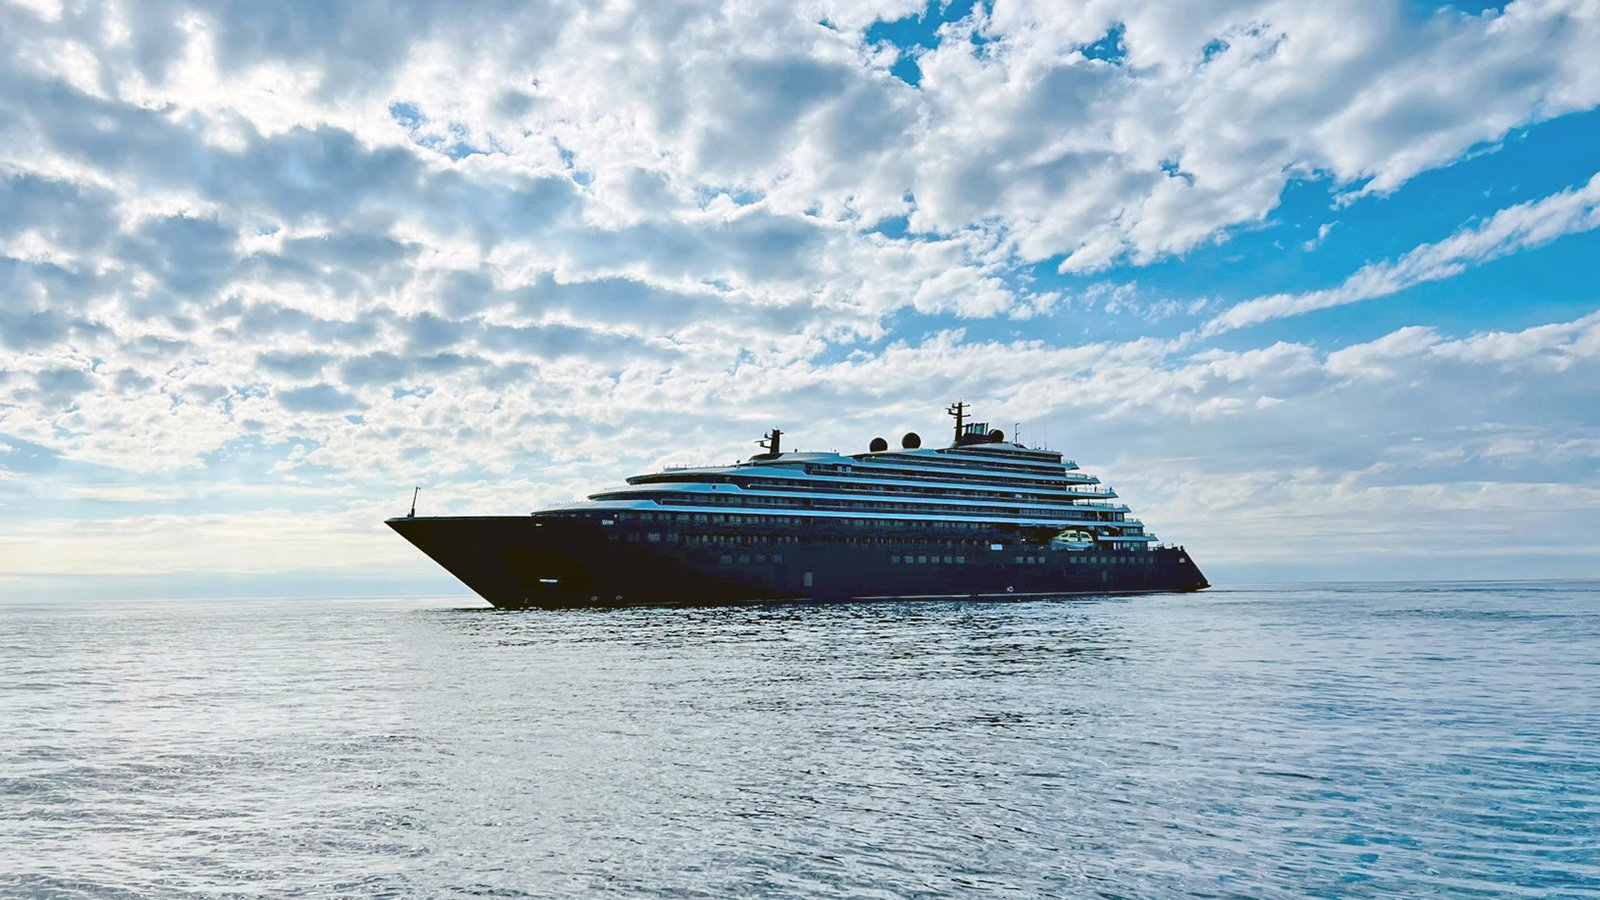 Re-inventing luxury at sea: The Ritz-Carlton takes to the water